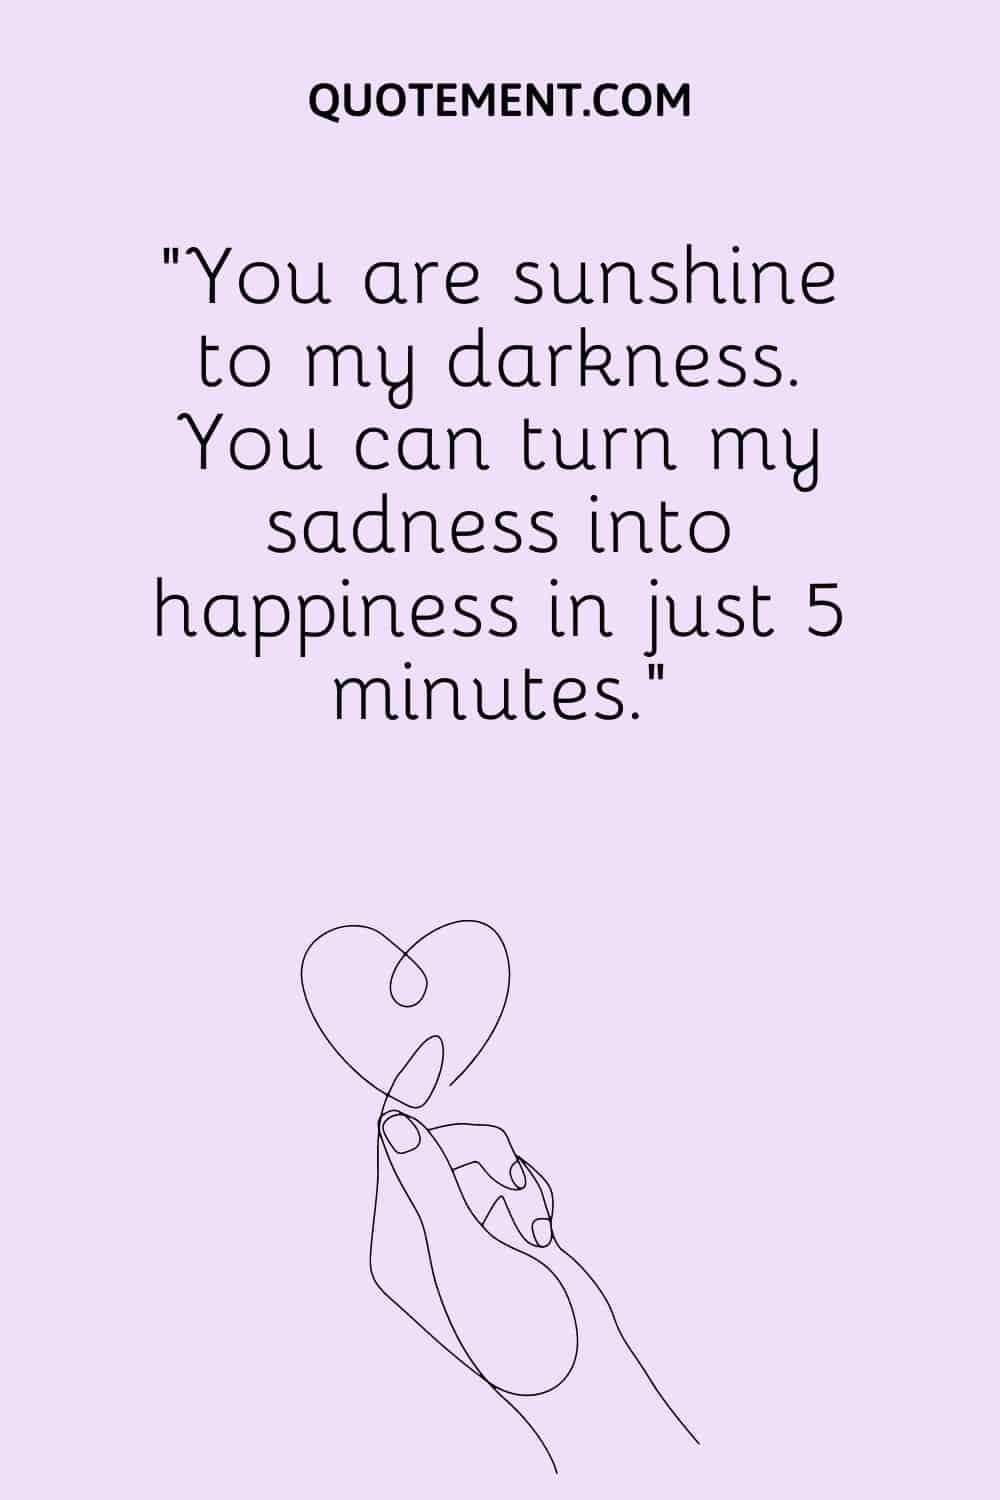 You are sunshine to my darkness.